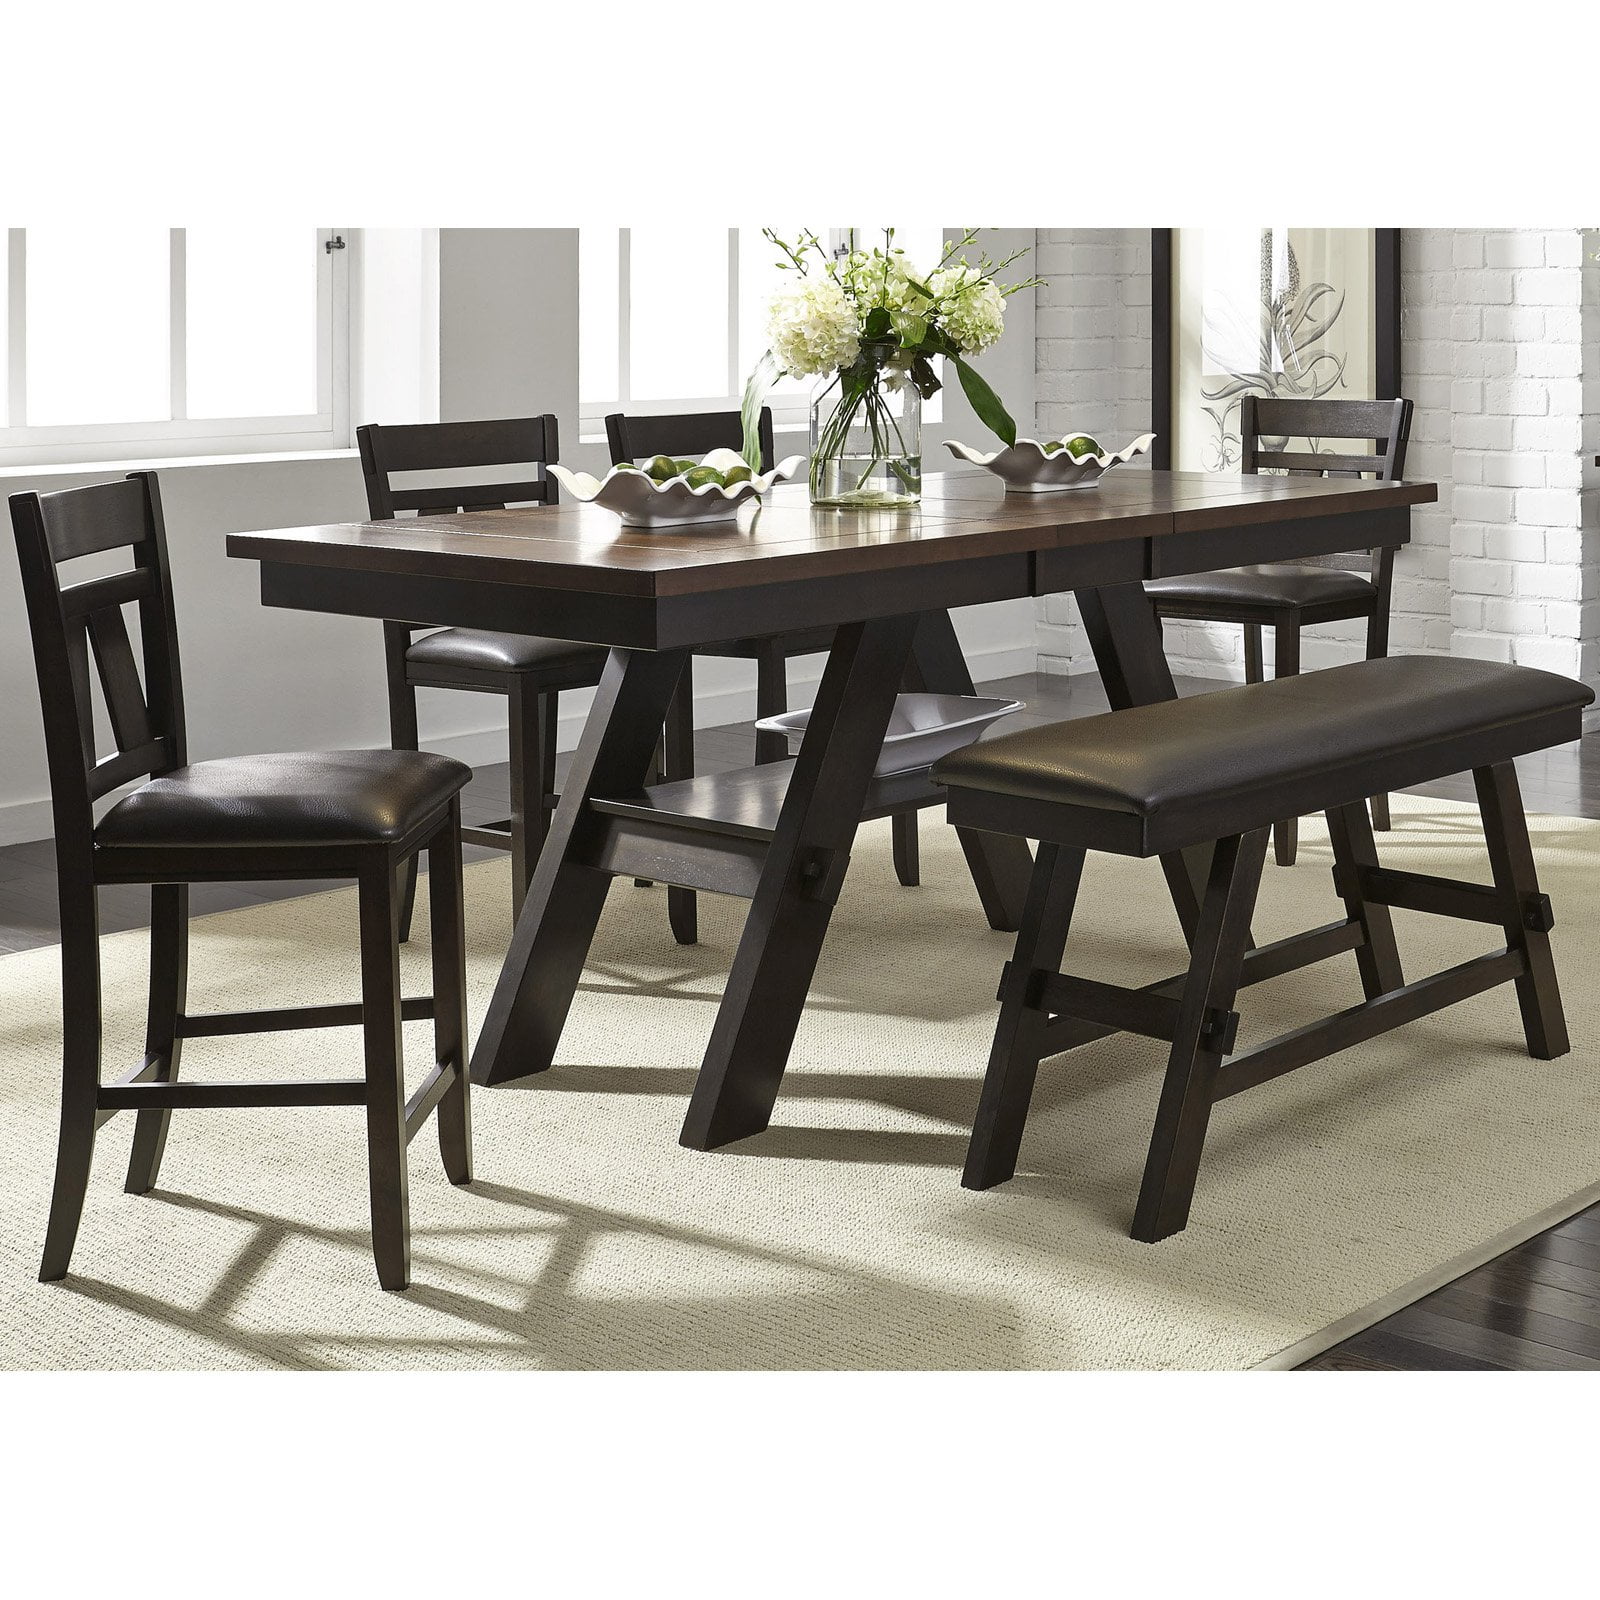  Dining Chair Height Extenders with Simple Decor